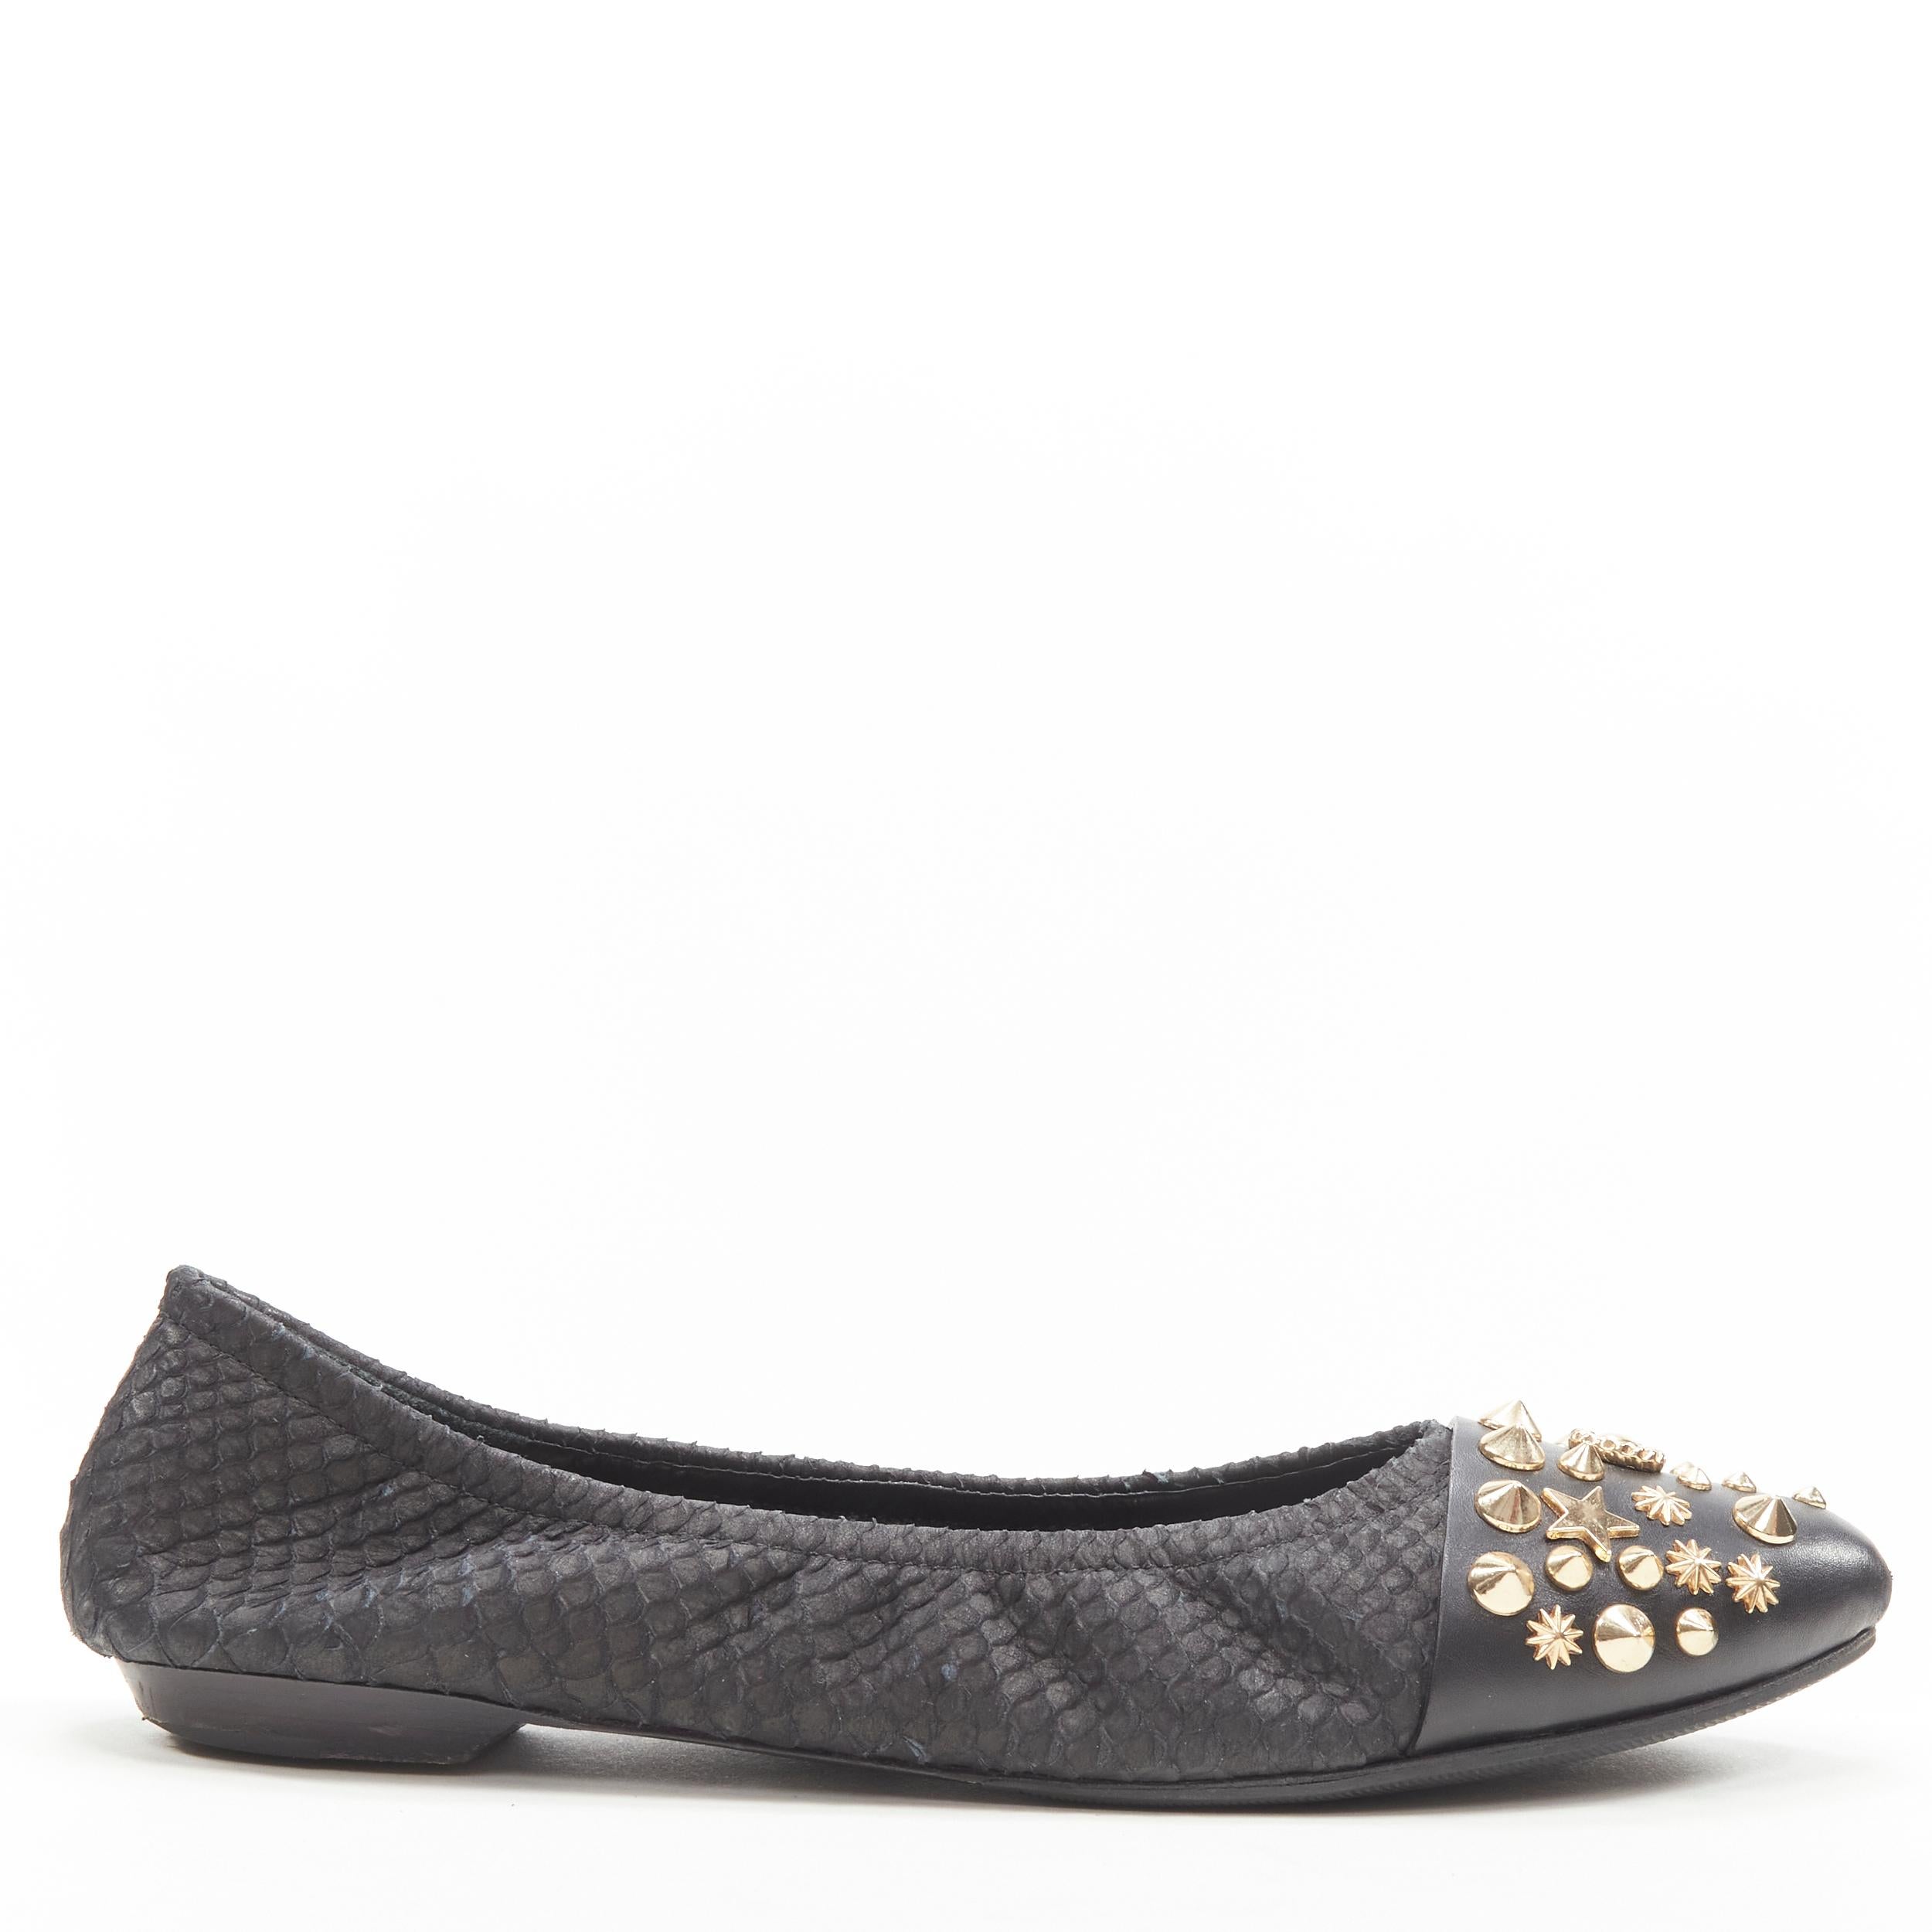 GIVENCHY Riccardo Tisci gold star spike stud toe cap scaled ballerina flats EU37 
Reference: ANWU/A00172 
Brand: Givenchy 
Designer: Riccardo Tisci
Material: Leather 
Color: Black 
Pattern: Scaled 
Extra Detail: Gold-tone hardware. Soft scaled